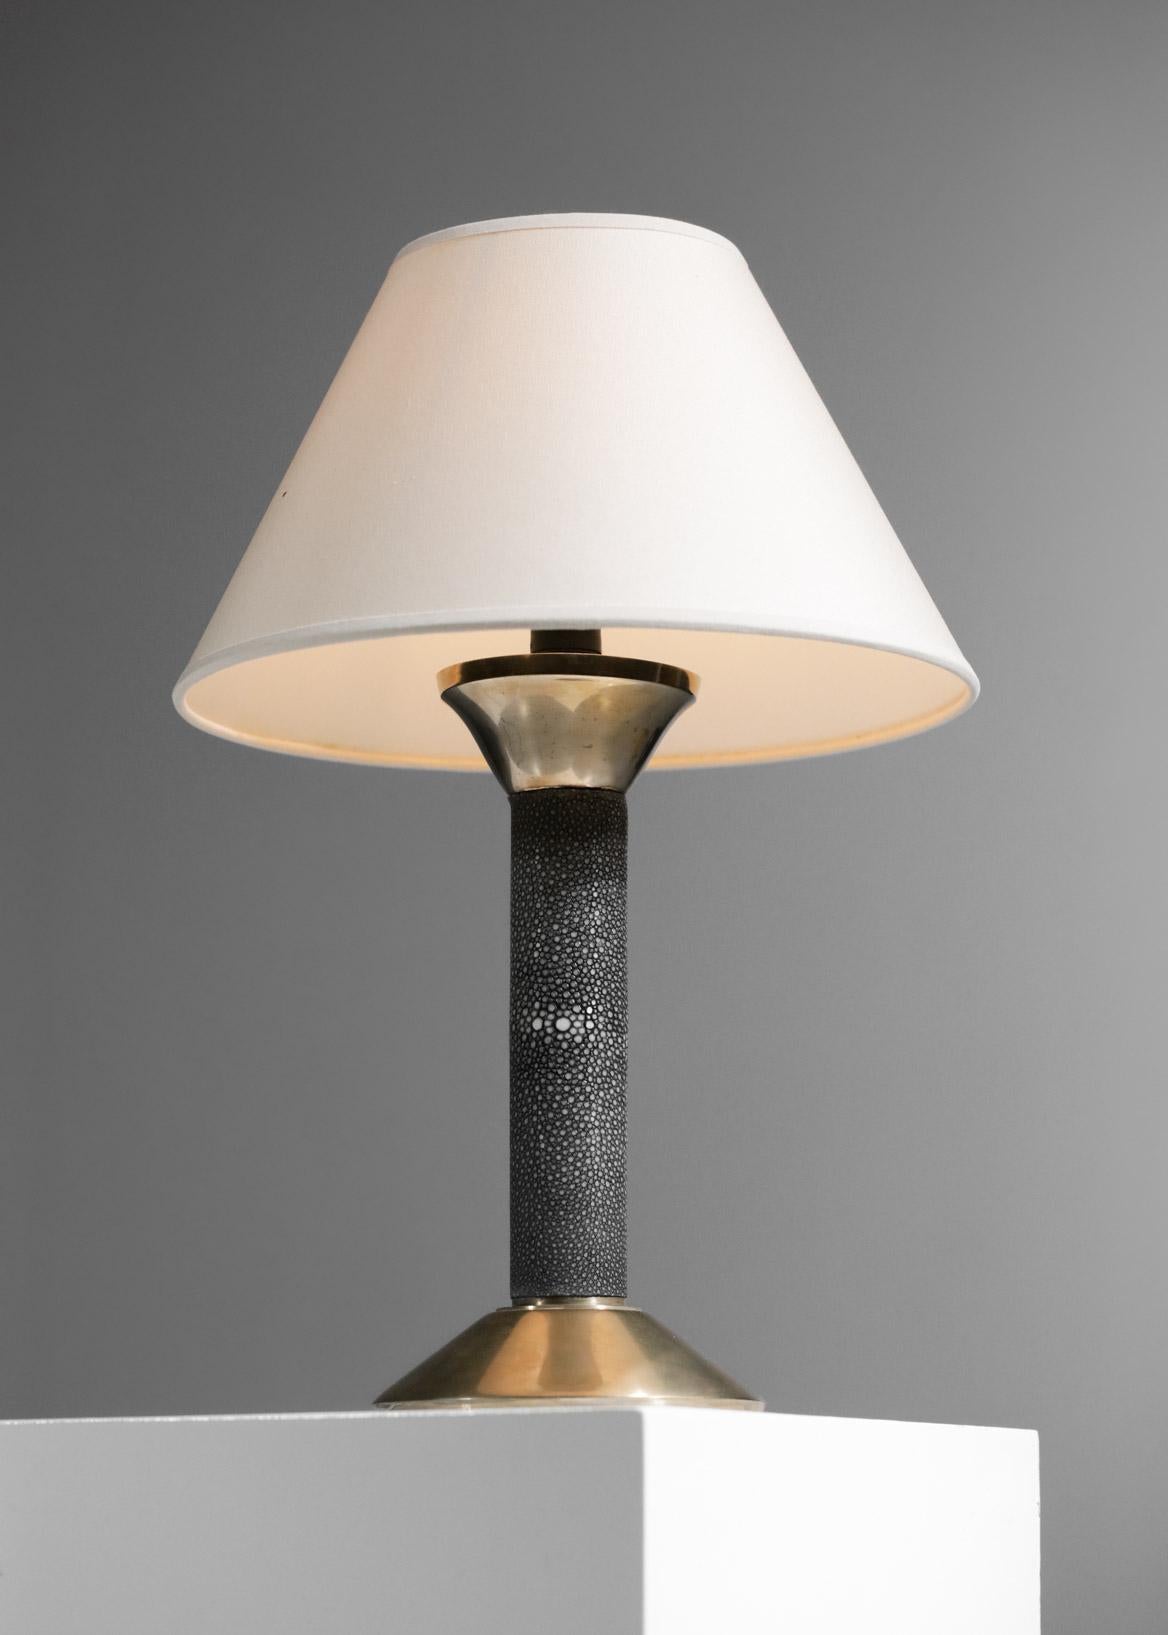 Mid-Century Modern Art Deco Table Lamp in Stingray Attributed to André Groult Bronze 1940s - G082 For Sale